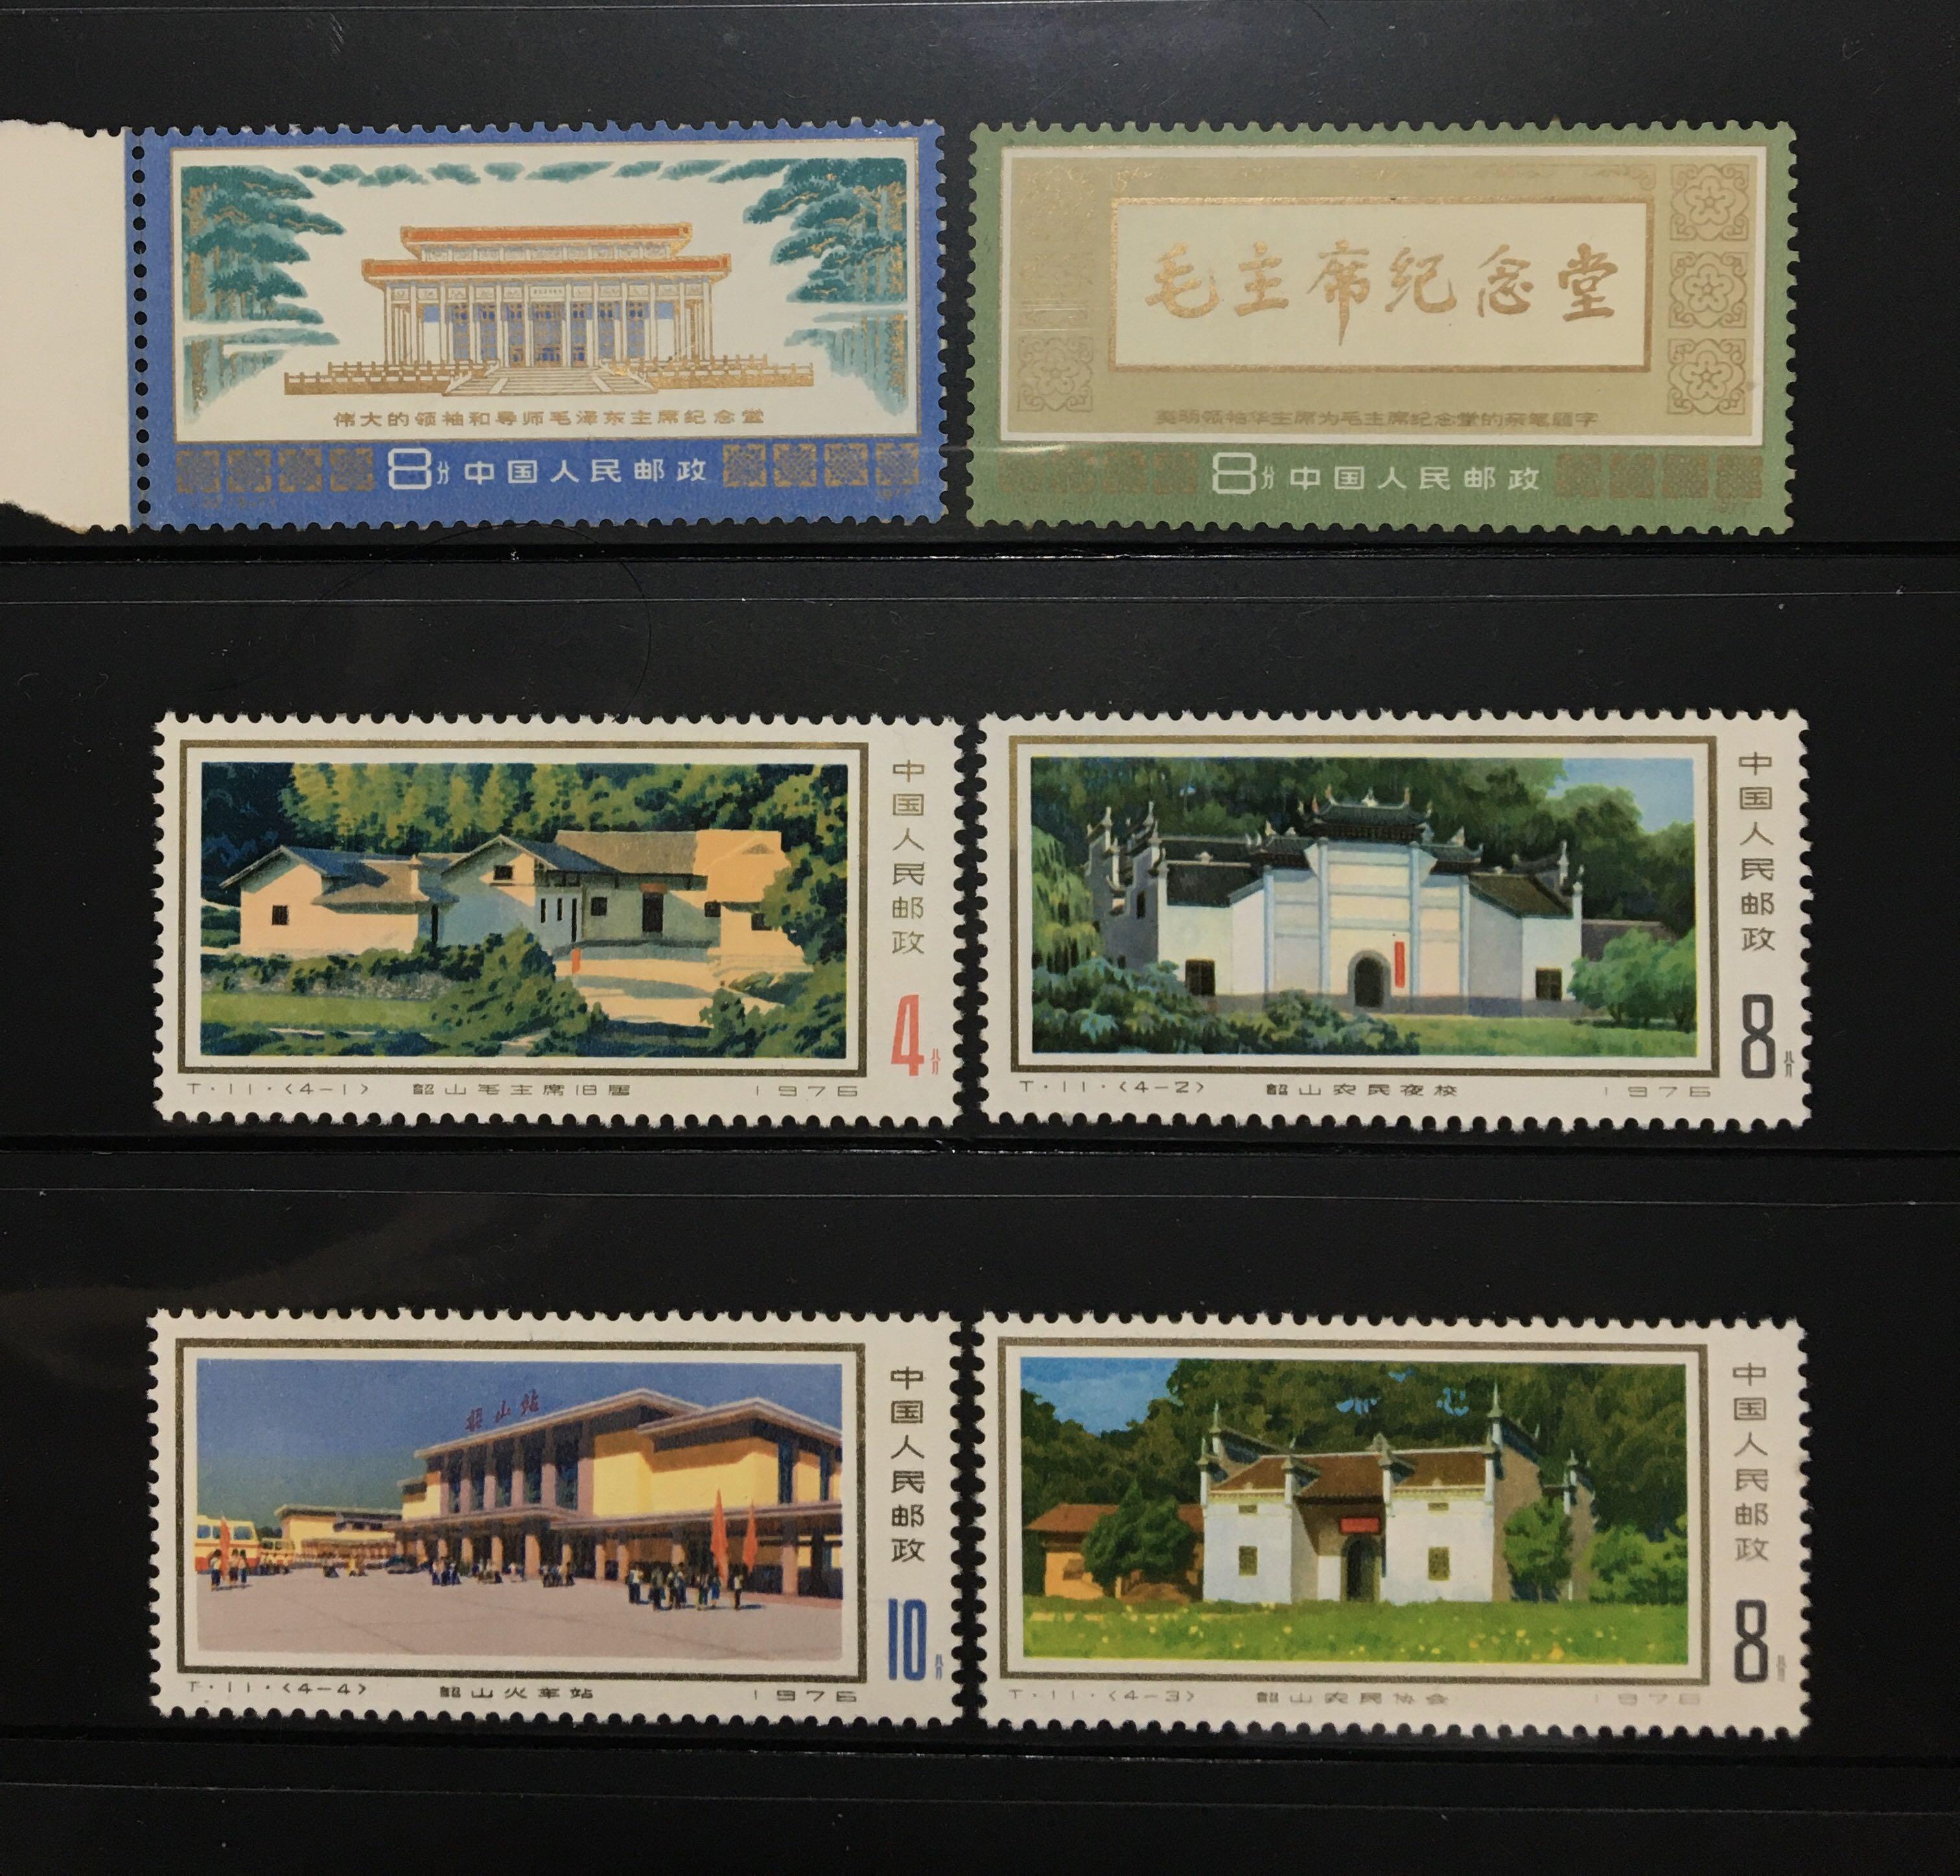 China Stamps-中国邮票：Two Sets - 1977.J22 & 1976.T11, Hobbies 